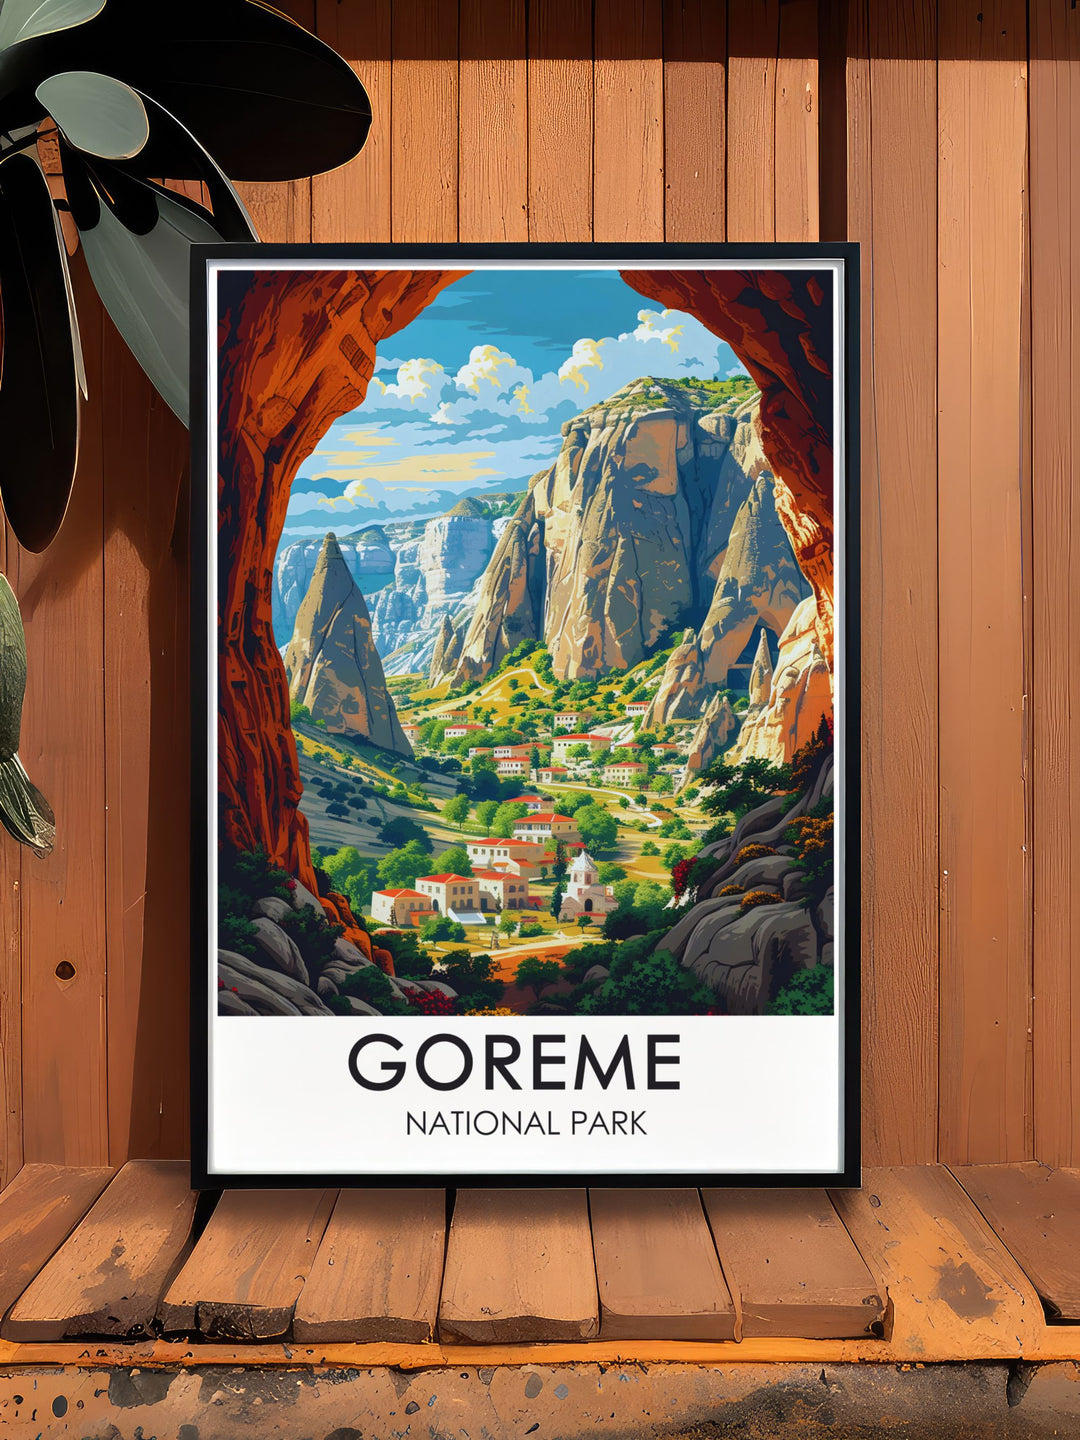 This travel poster of Goreme National Park in Cappadocia, Turkey, features the iconic Fairy Chimneys and the historical treasures of the Open Air Museum, creating a vibrant and detailed artwork that celebrates the regions unique landscape and rich history.